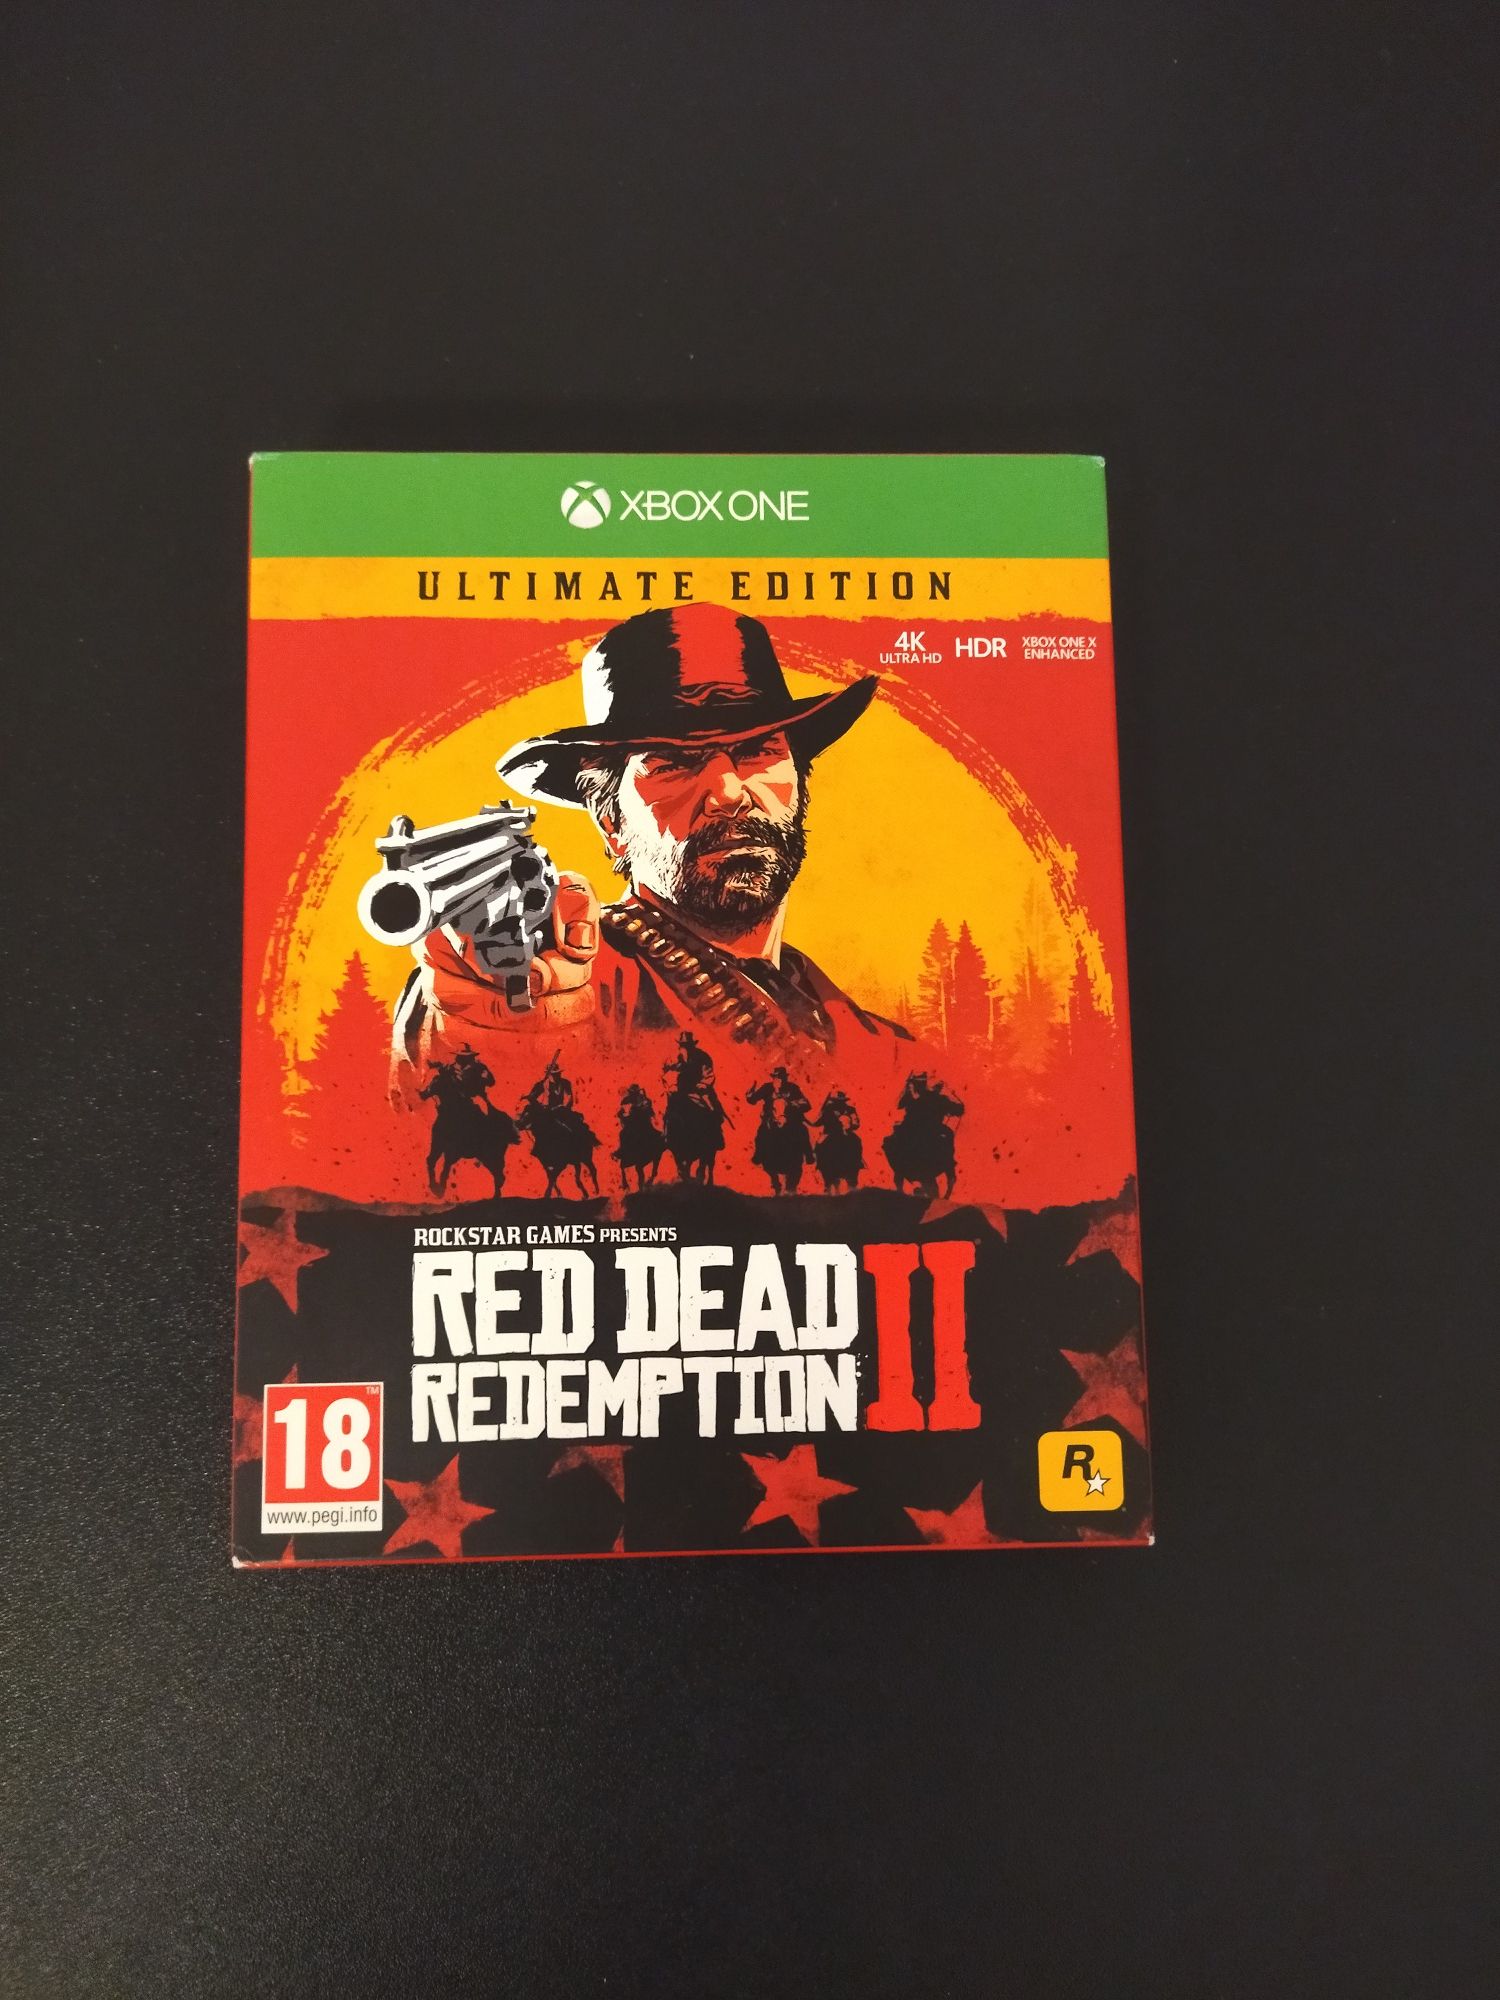 Red dead redemption - Ultimate edition - Xbox One